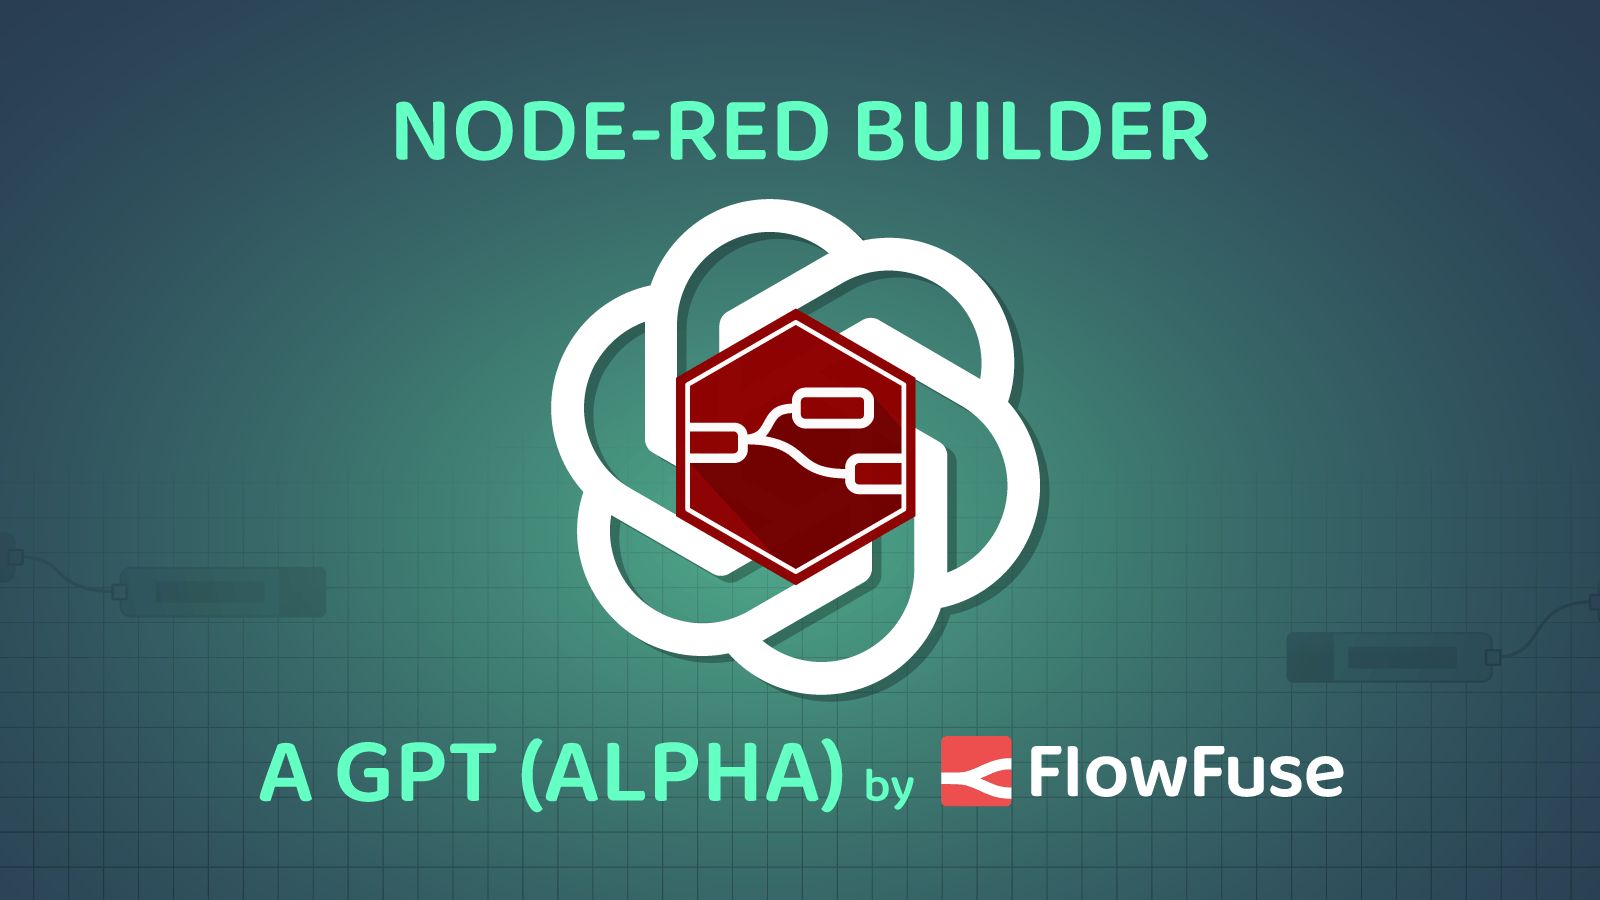 Image representing Node-Red Builder a GPT (Alpha) by FlowFuse